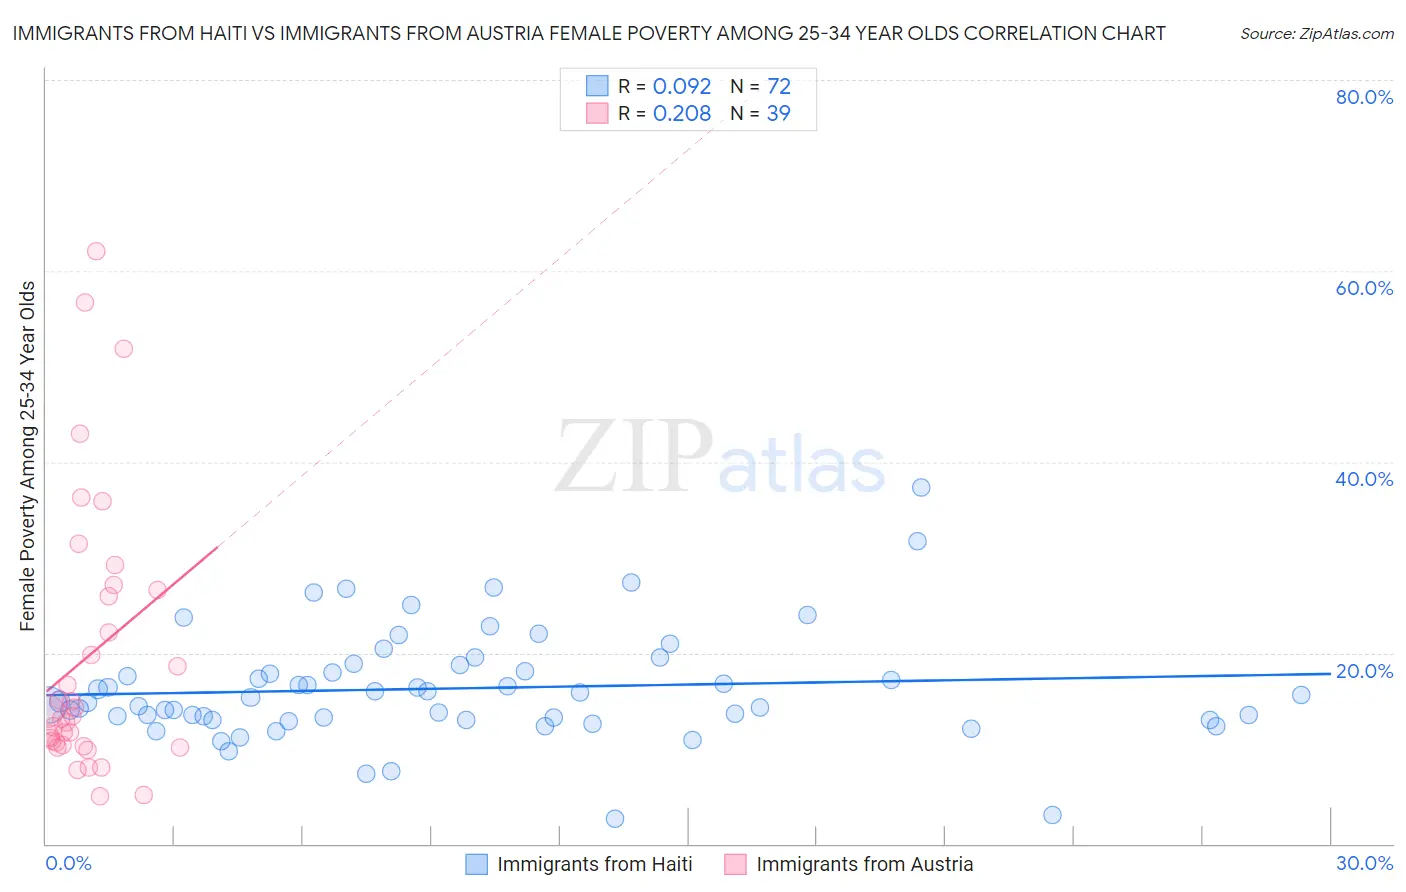 Immigrants from Haiti vs Immigrants from Austria Female Poverty Among 25-34 Year Olds